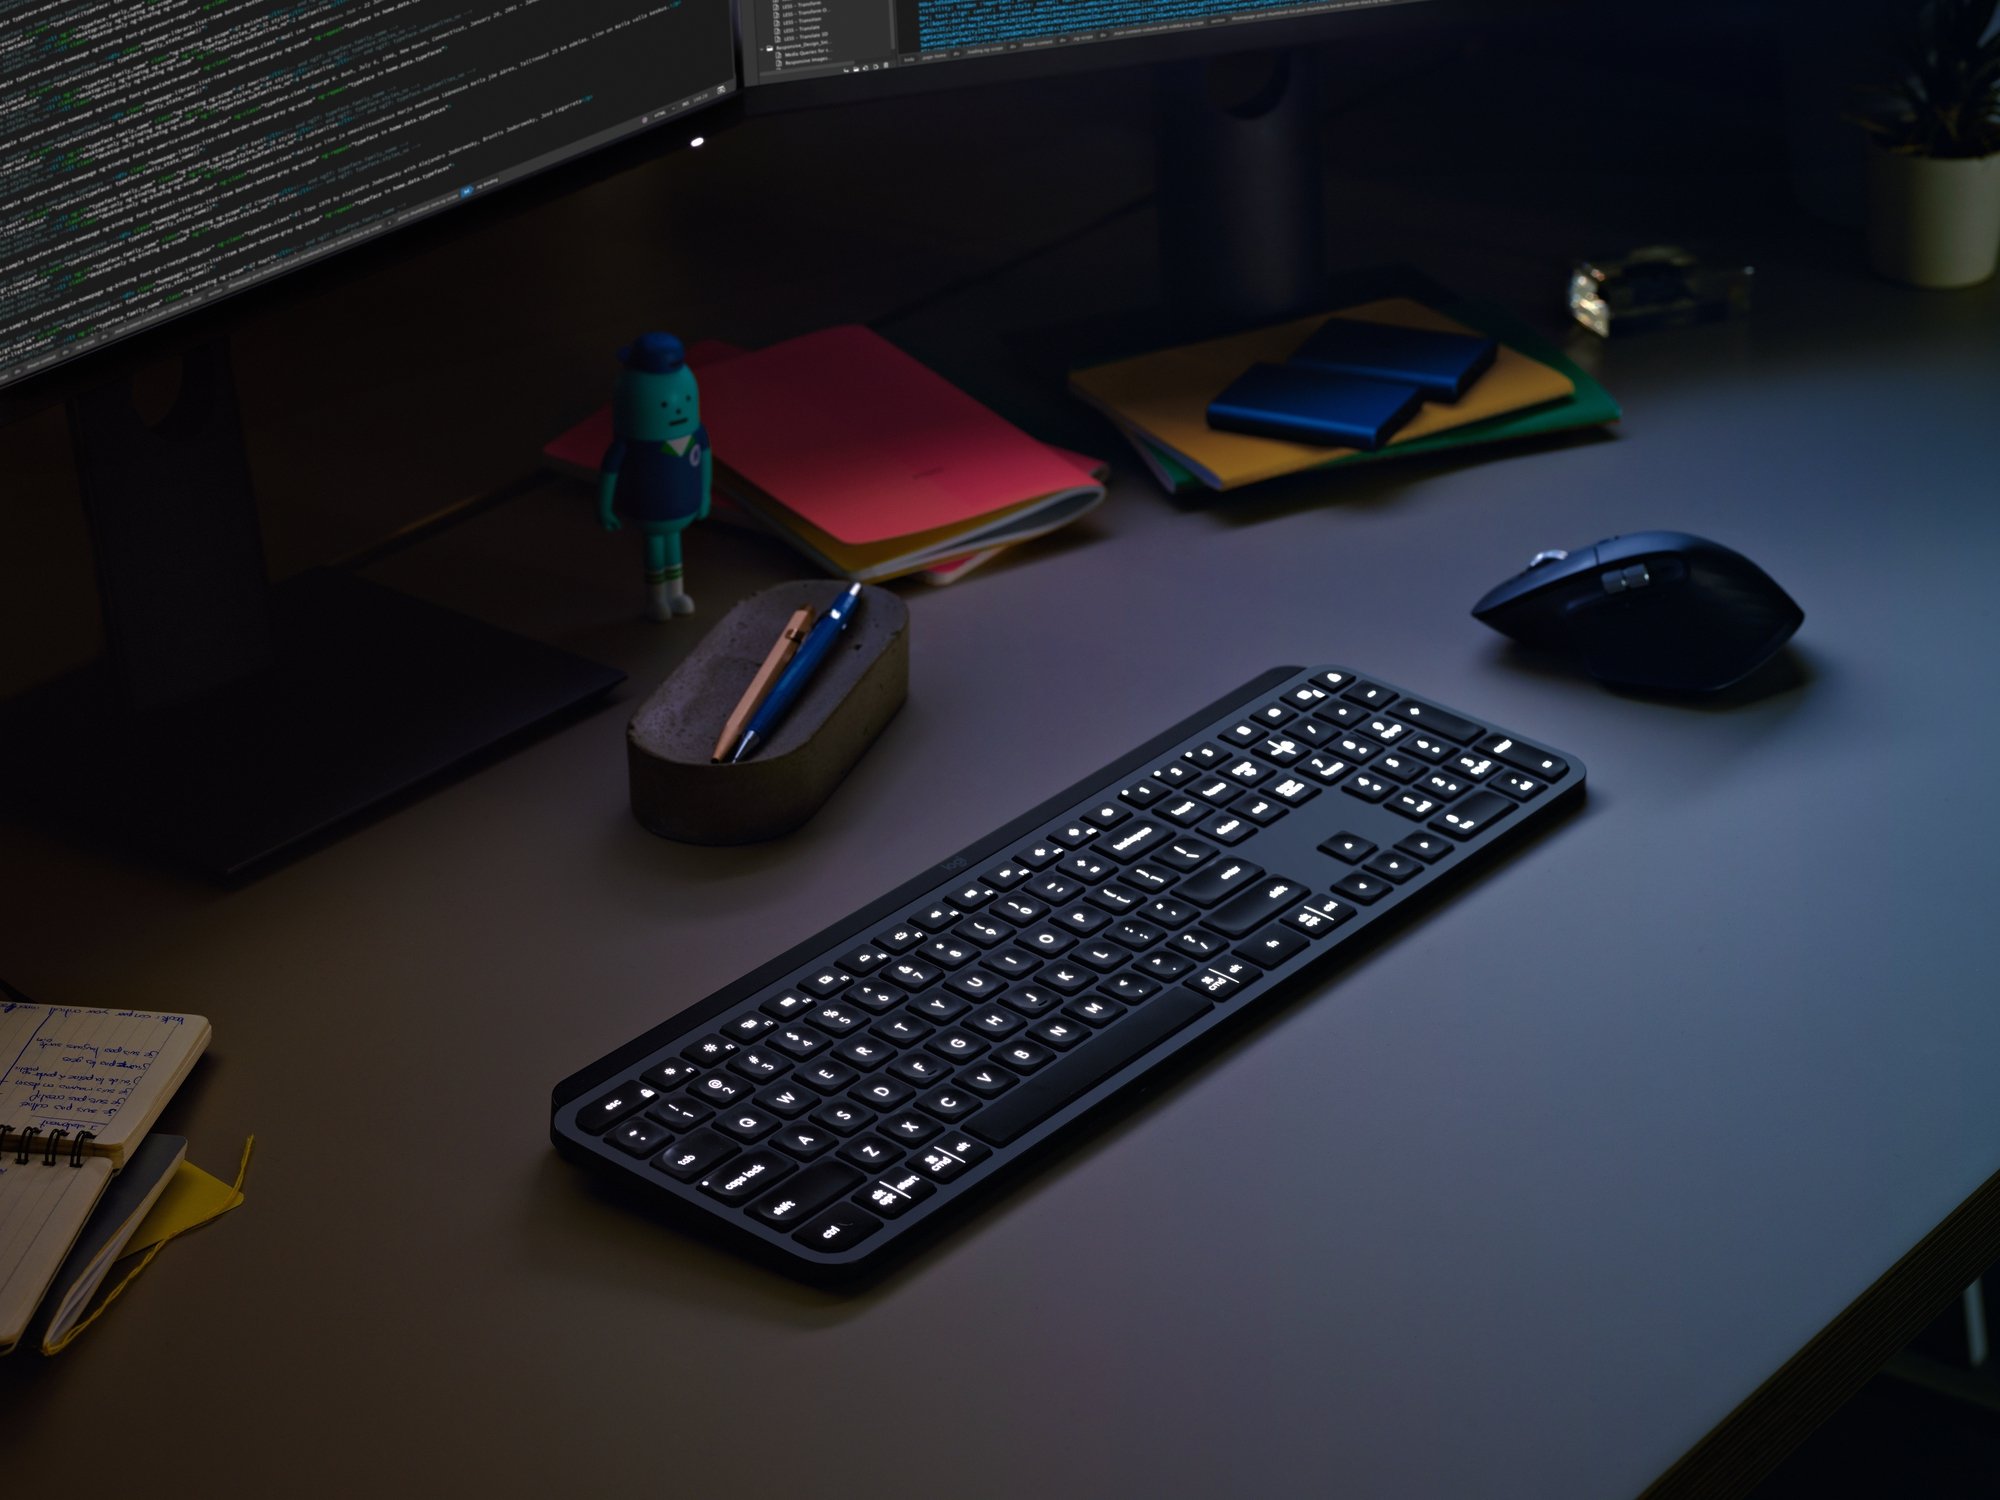 Logitech unveils the MX Master 3 and MX Keys, the newest additions to its MX line